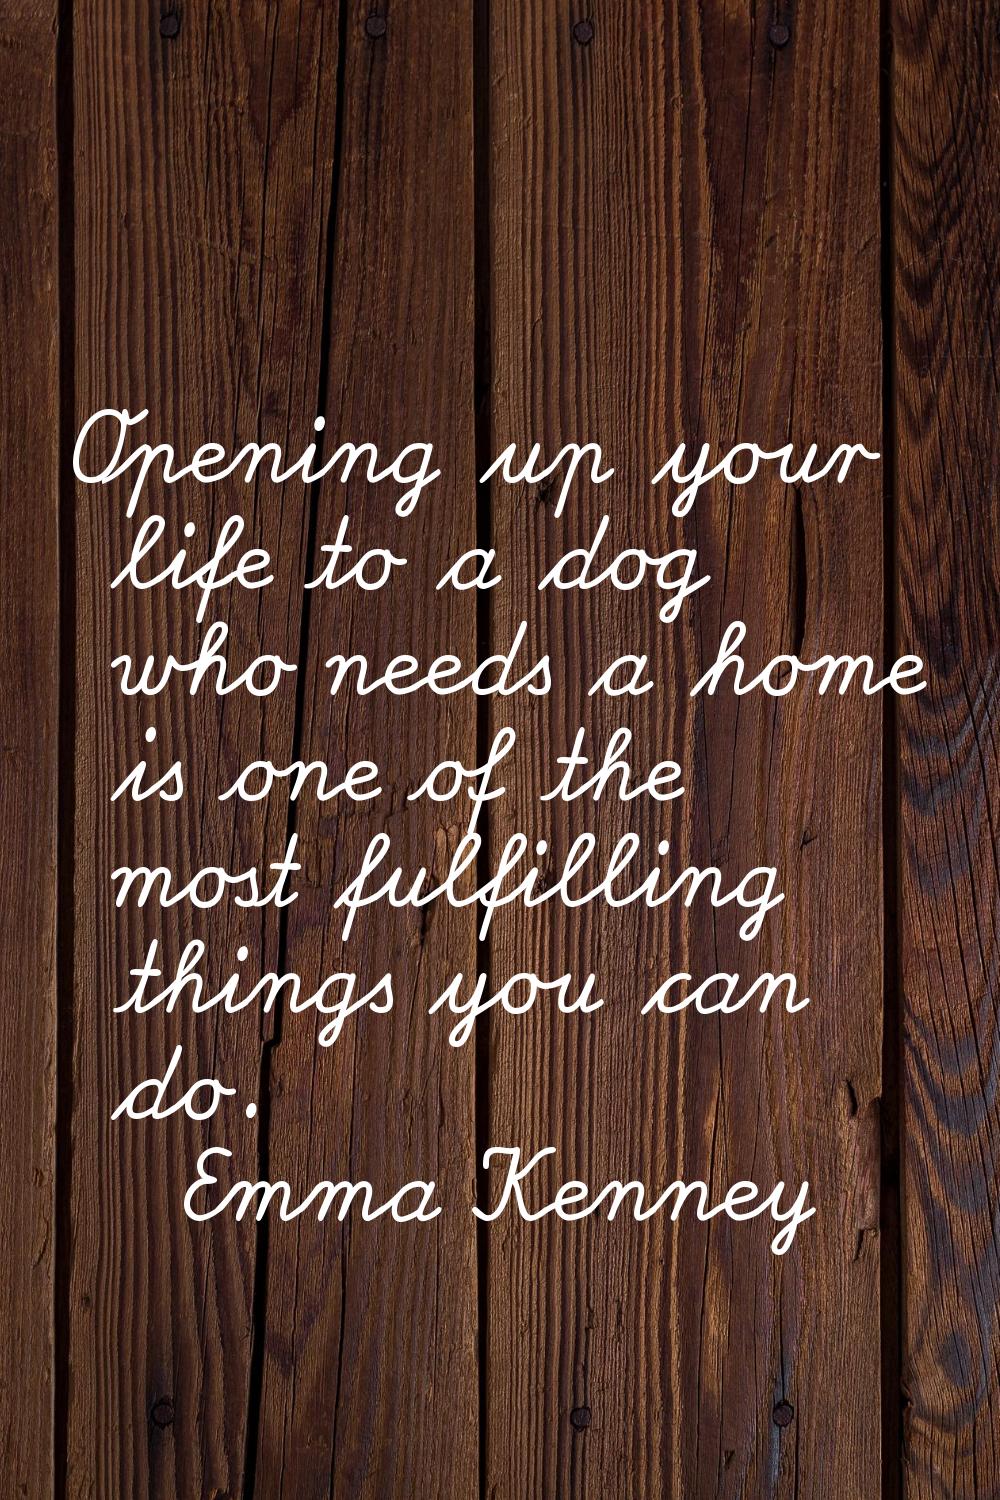 Opening up your life to a dog who needs a home is one of the most fulfilling things you can do.